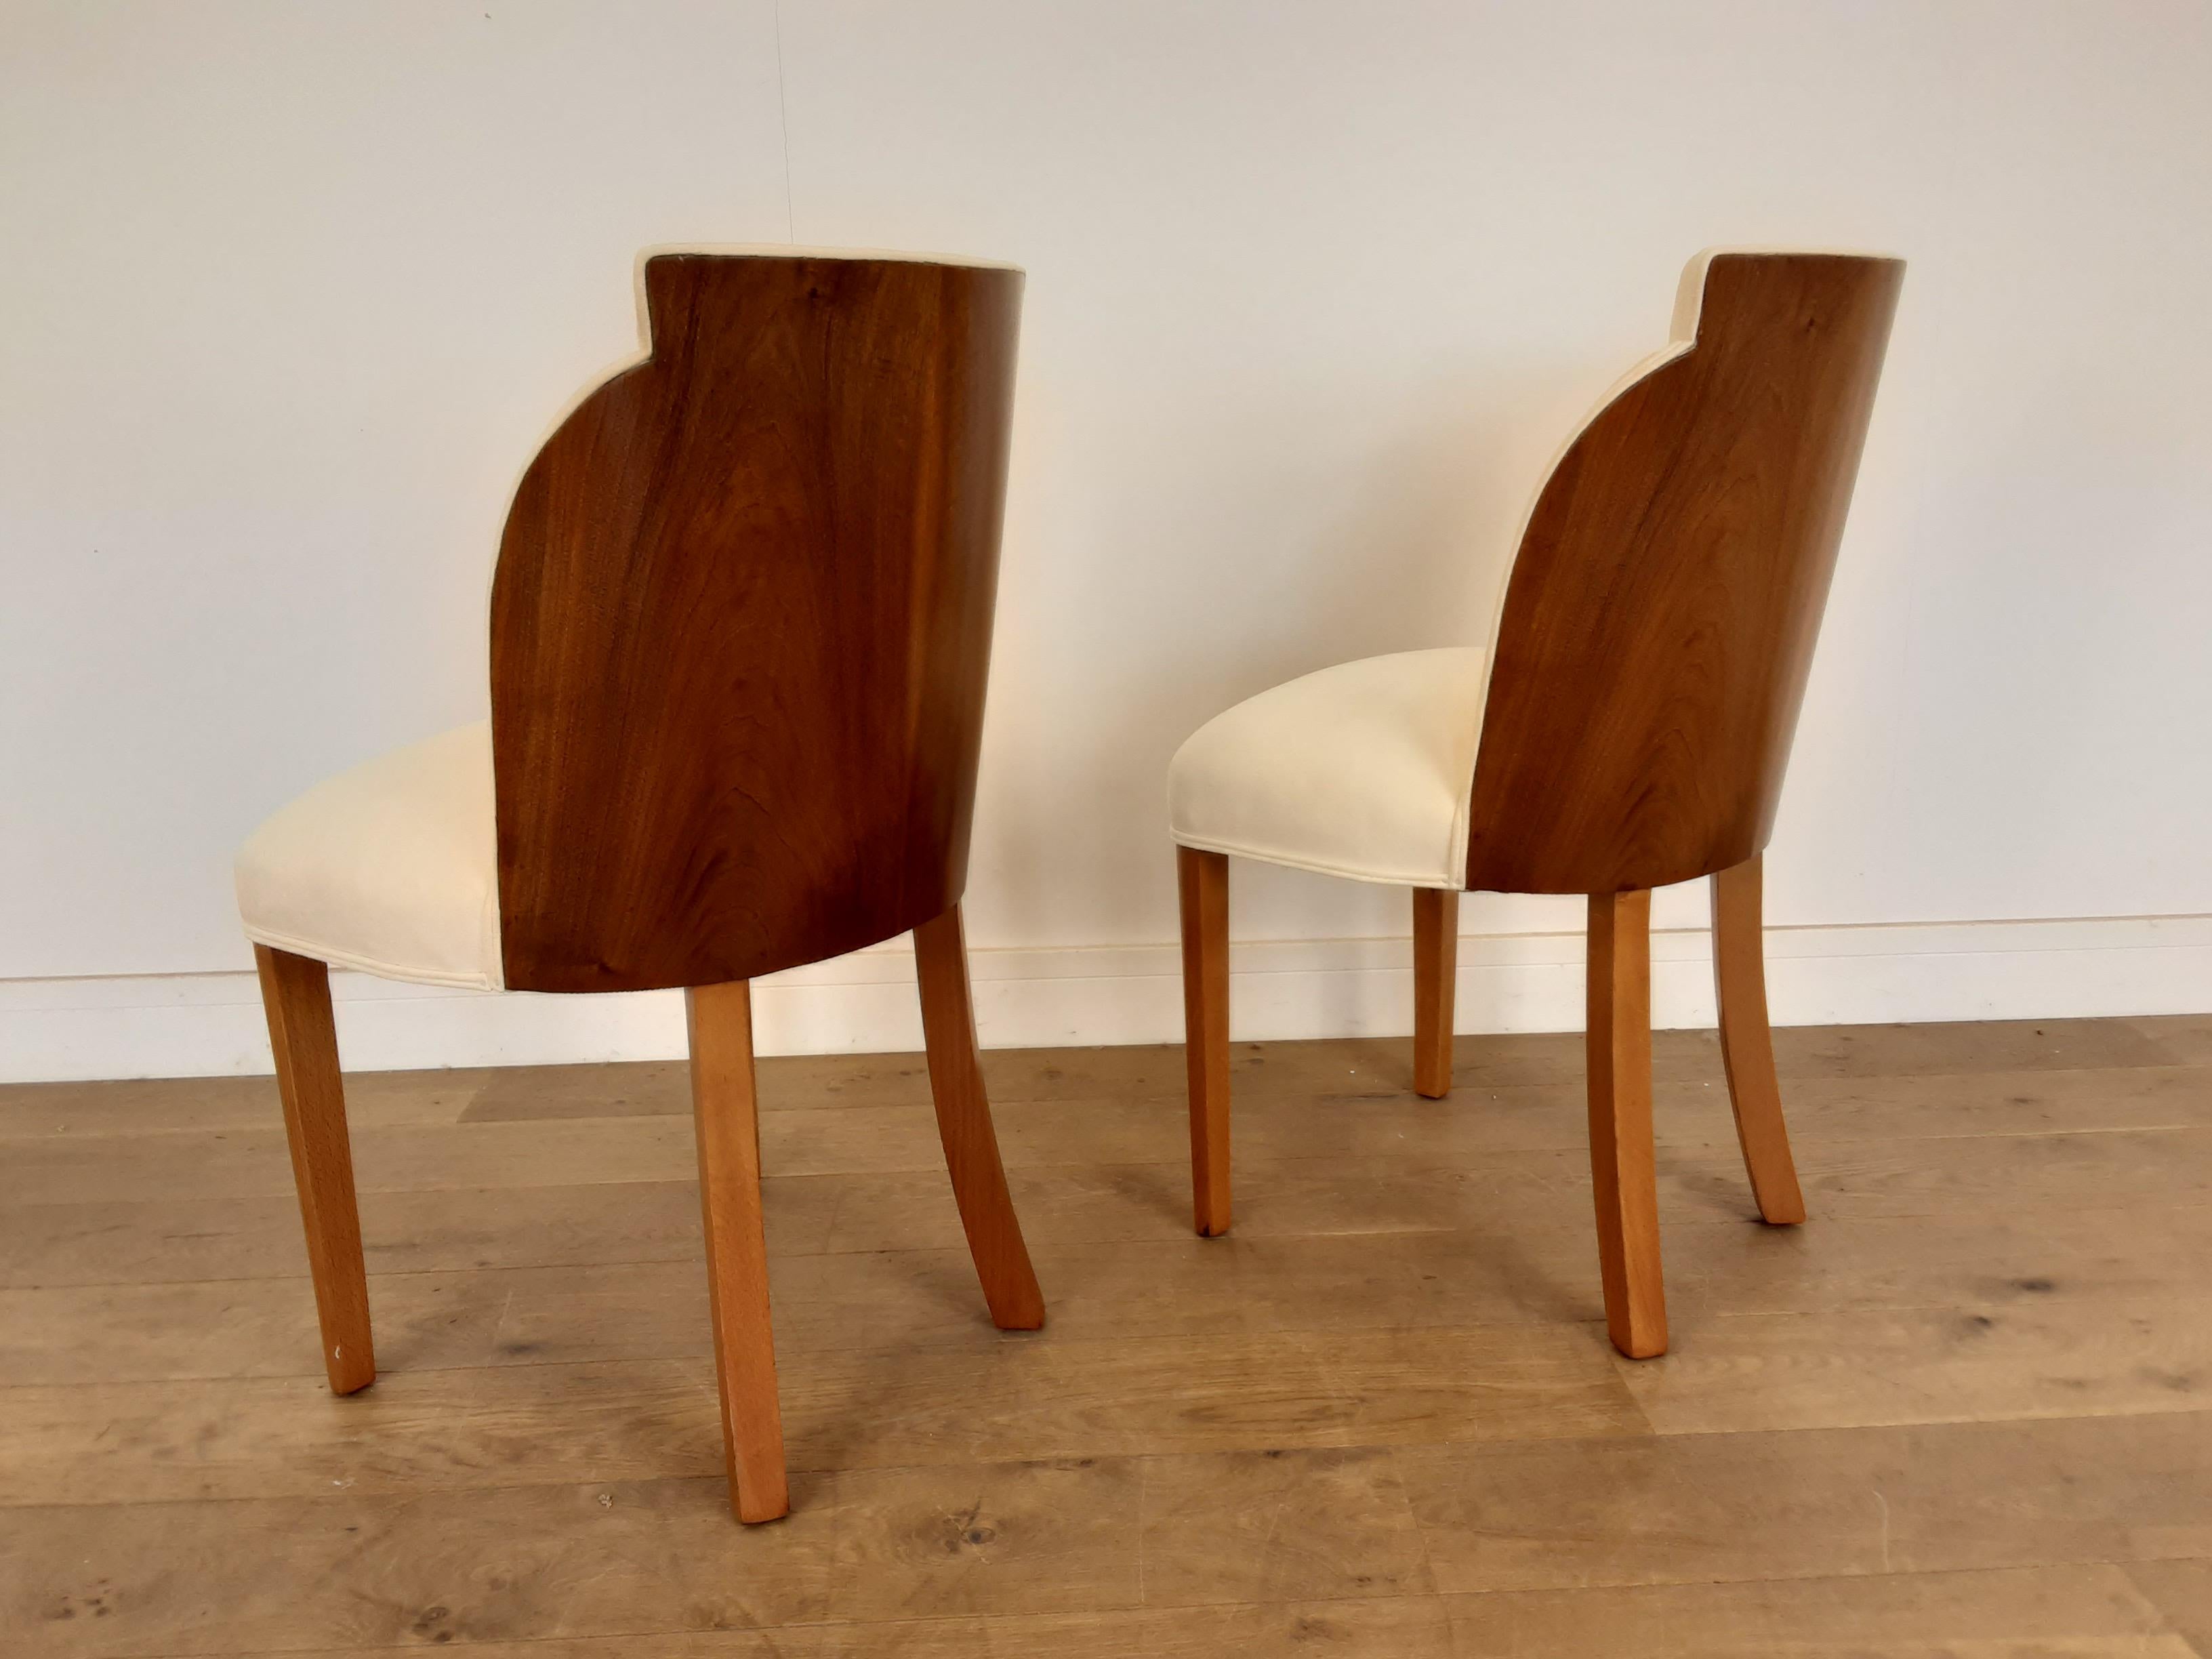 Pair of Art Deco Cloud Back Chairs in Walnut by Epstein, circa 1930 For Sale 3